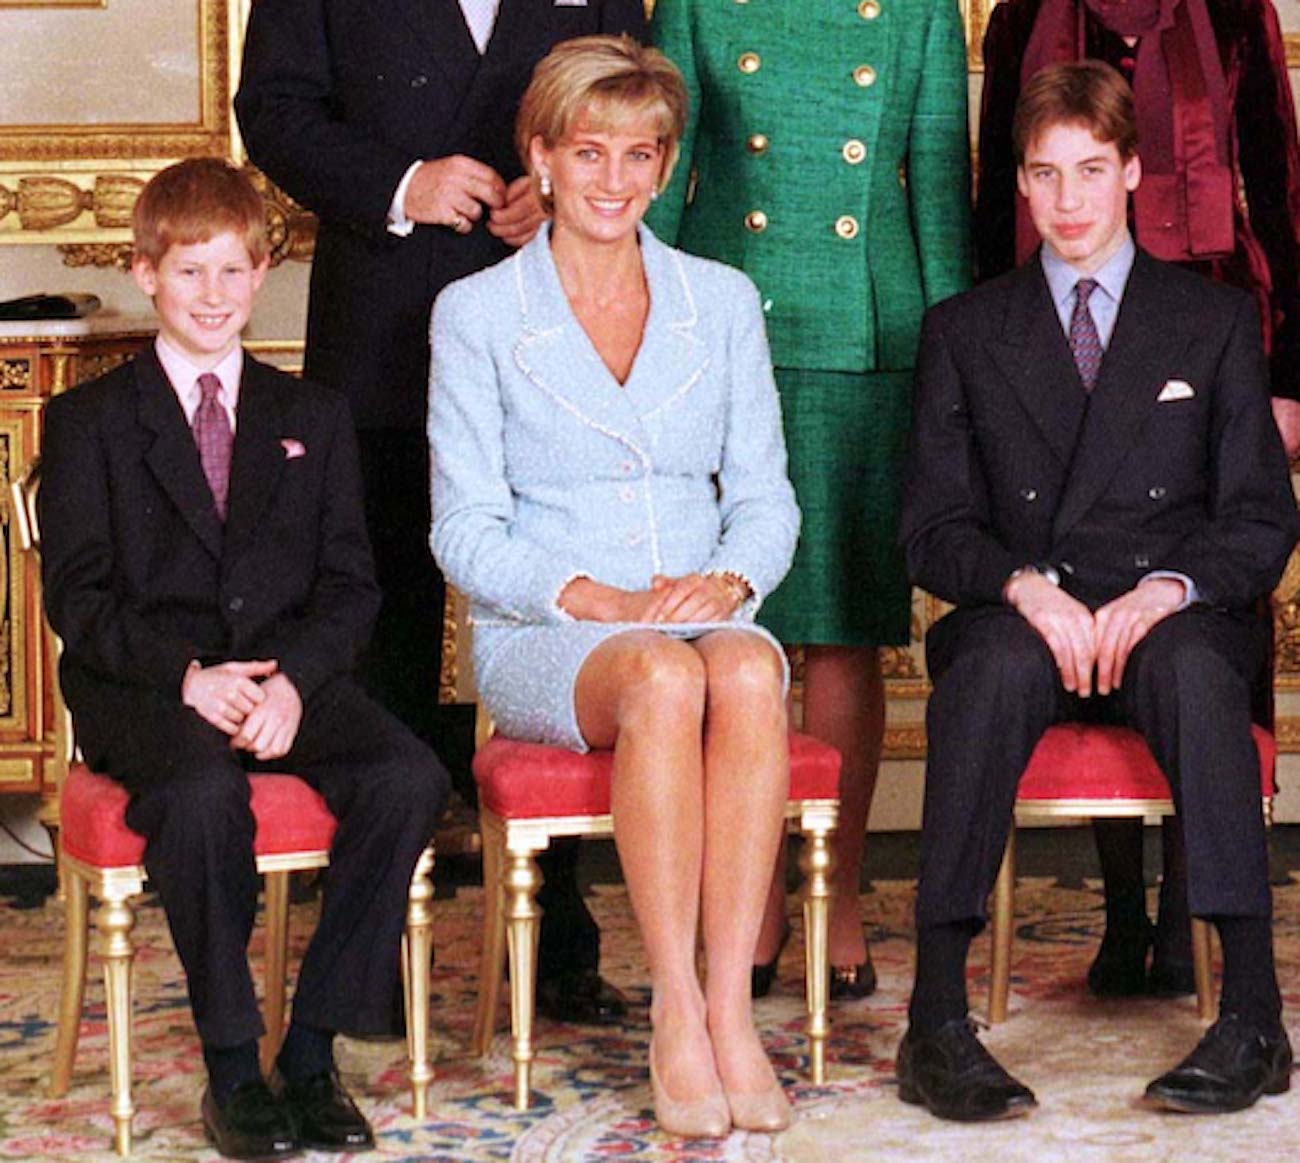 Prince Harry, Princess Diana, and Prince William smile as they sit in chairs posing for photographers following Prince William's confirmation